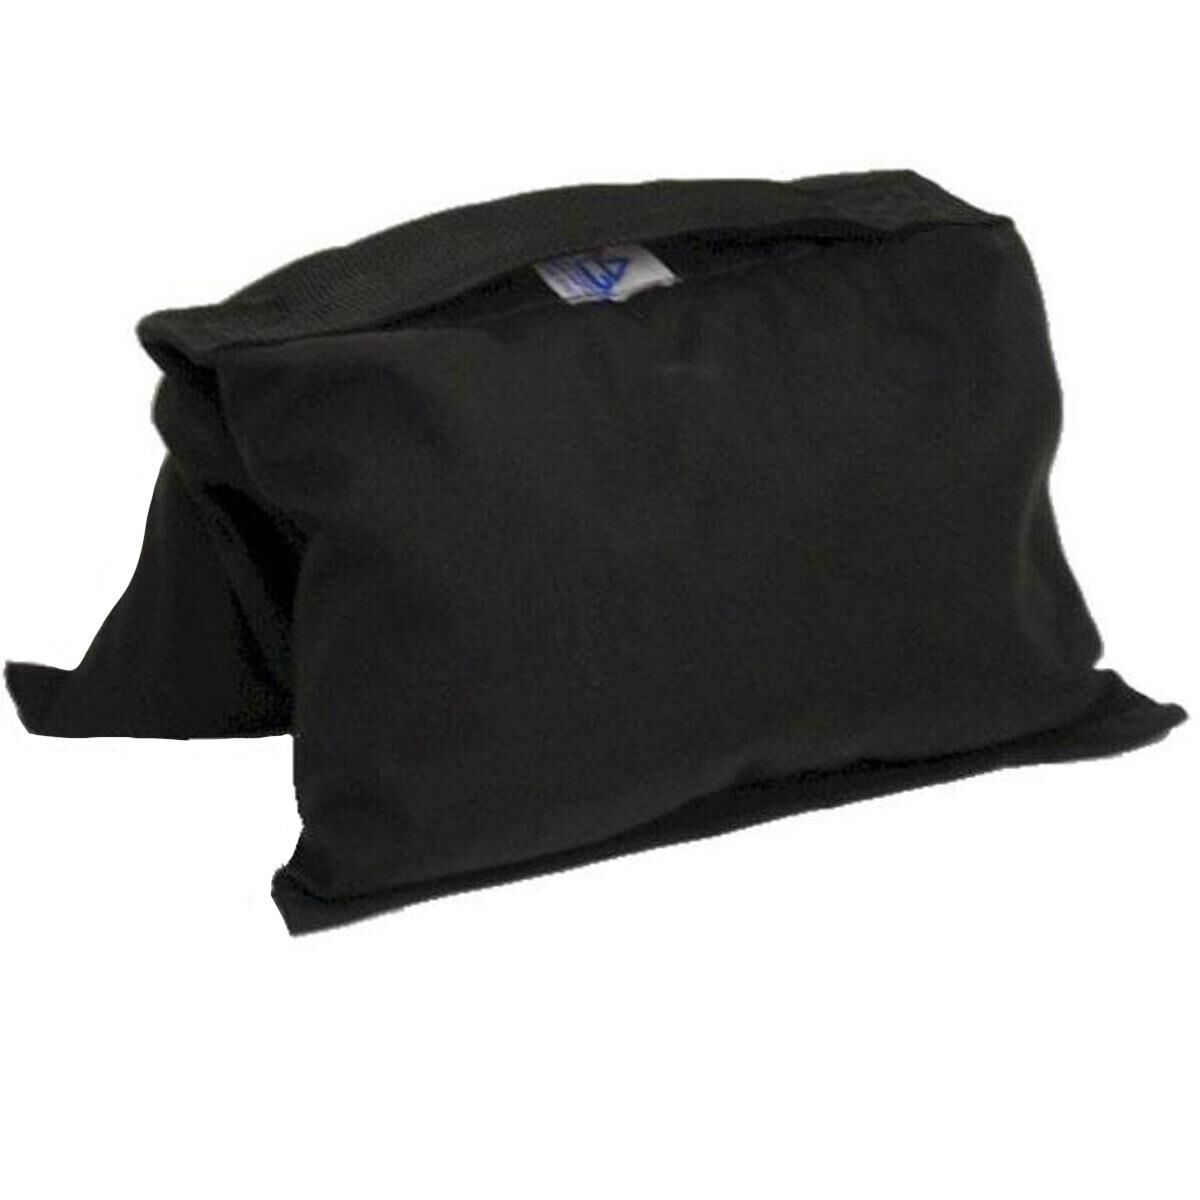 Advantage Gripware 5lbs Stainless Steel Shot Bag with Black Handles